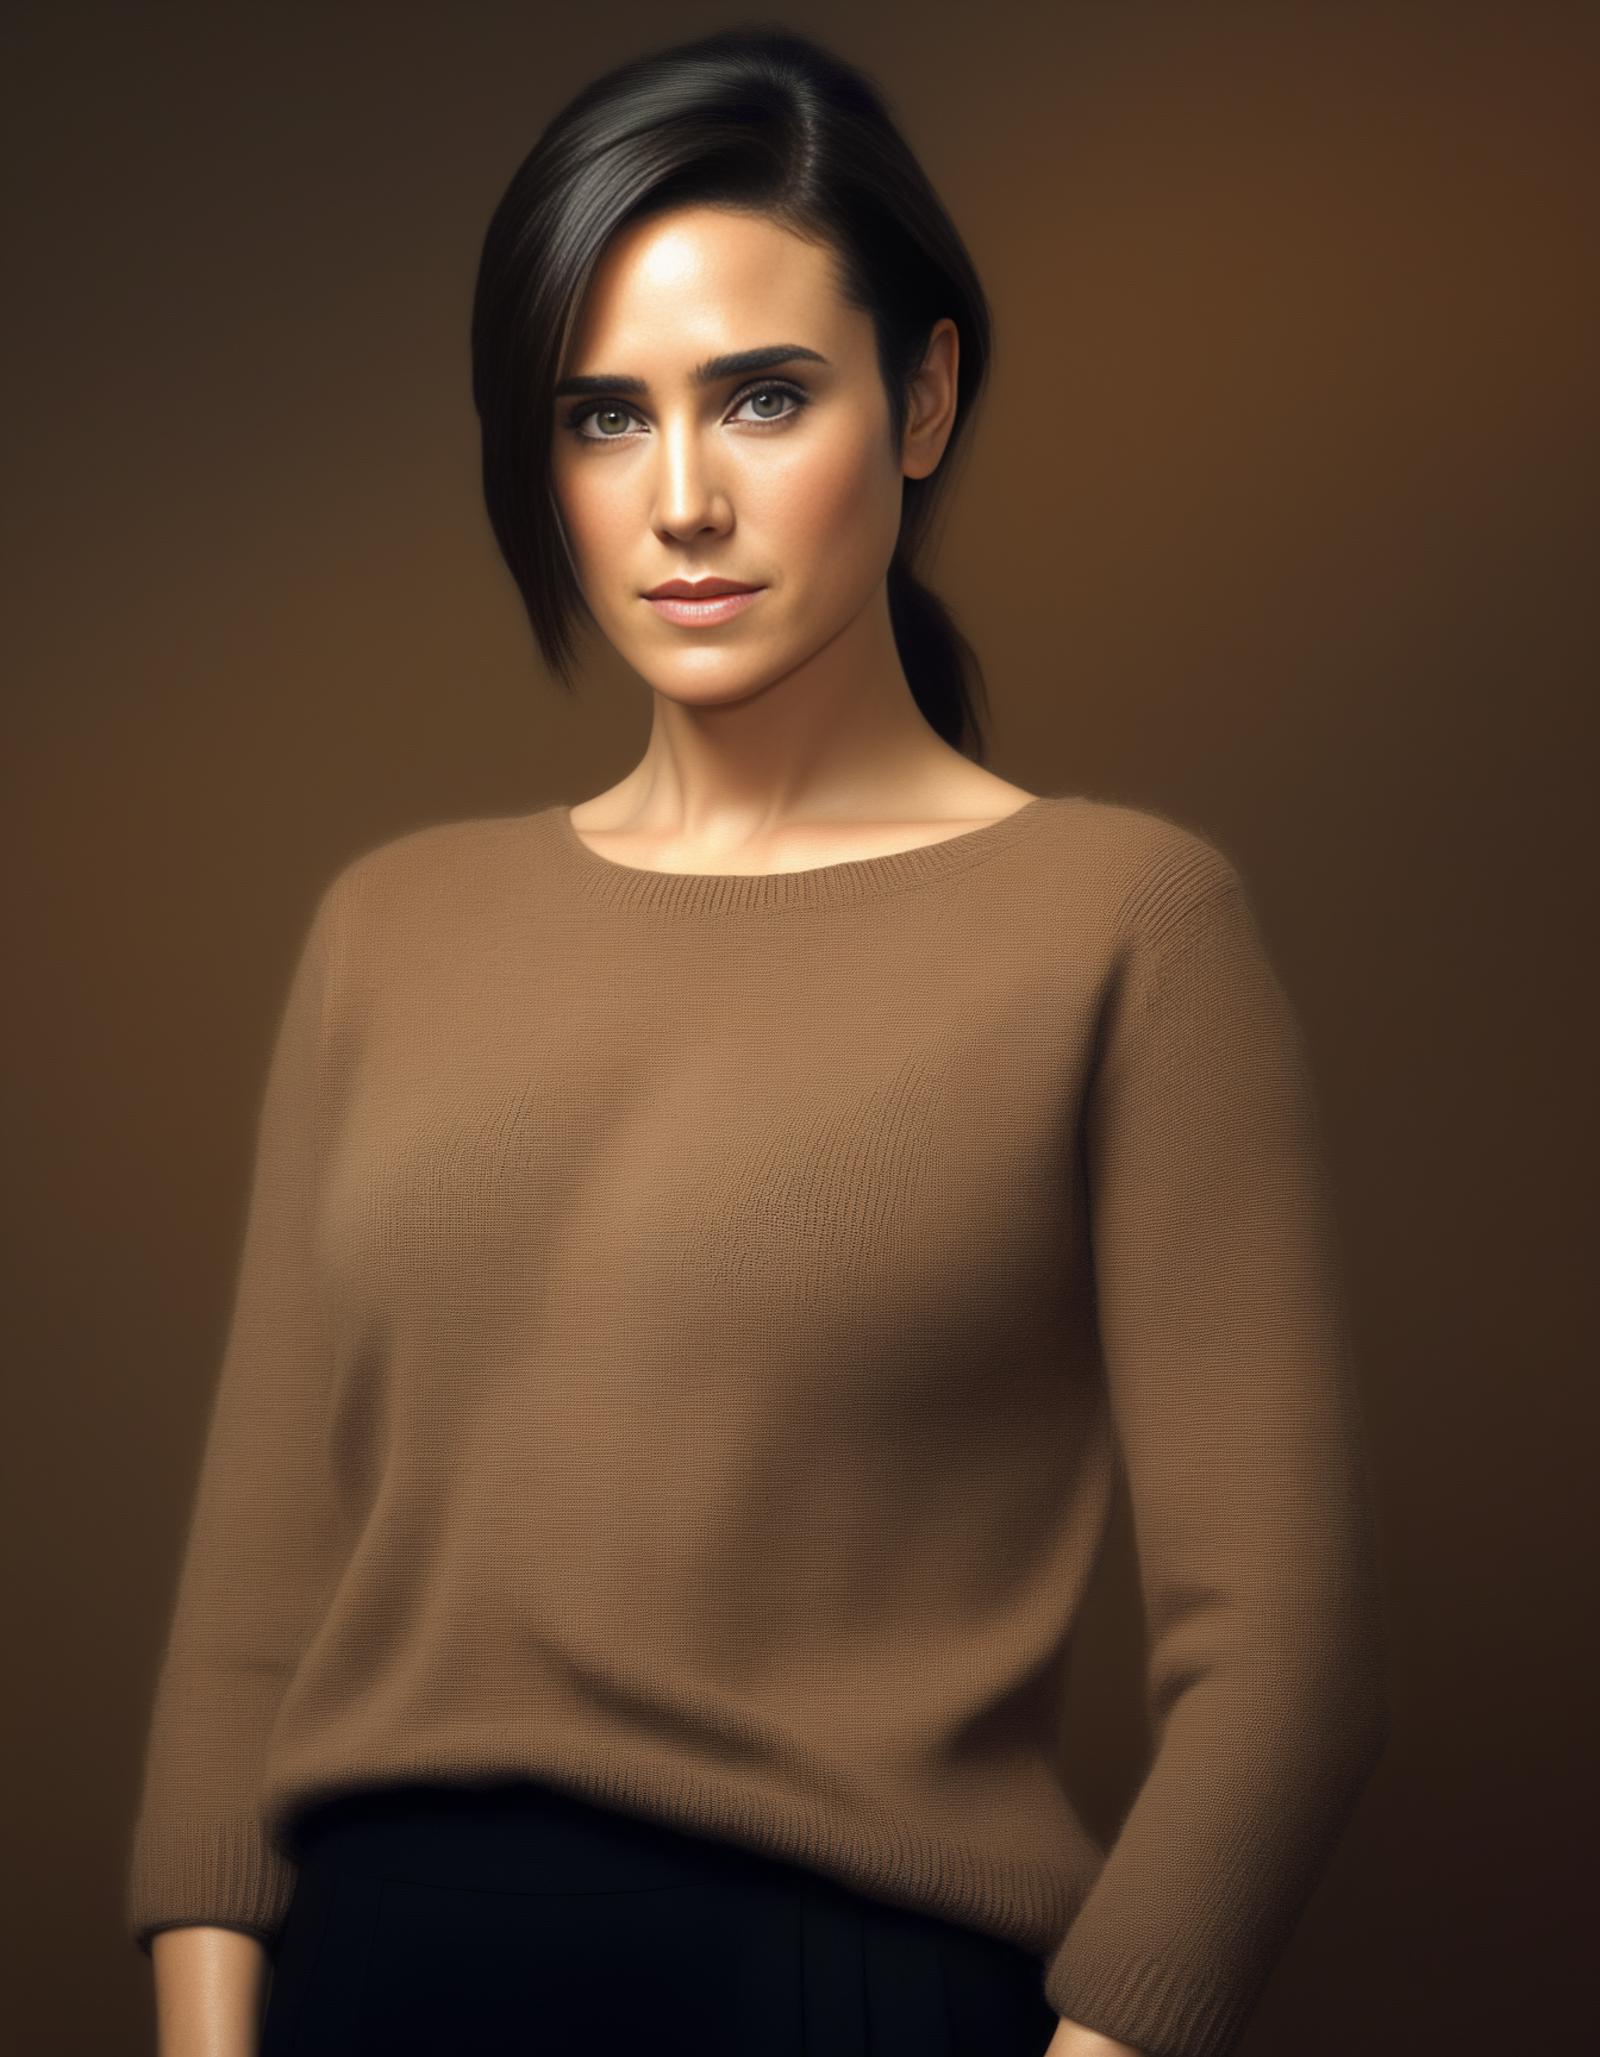 Jennifer Connelly image by parar20